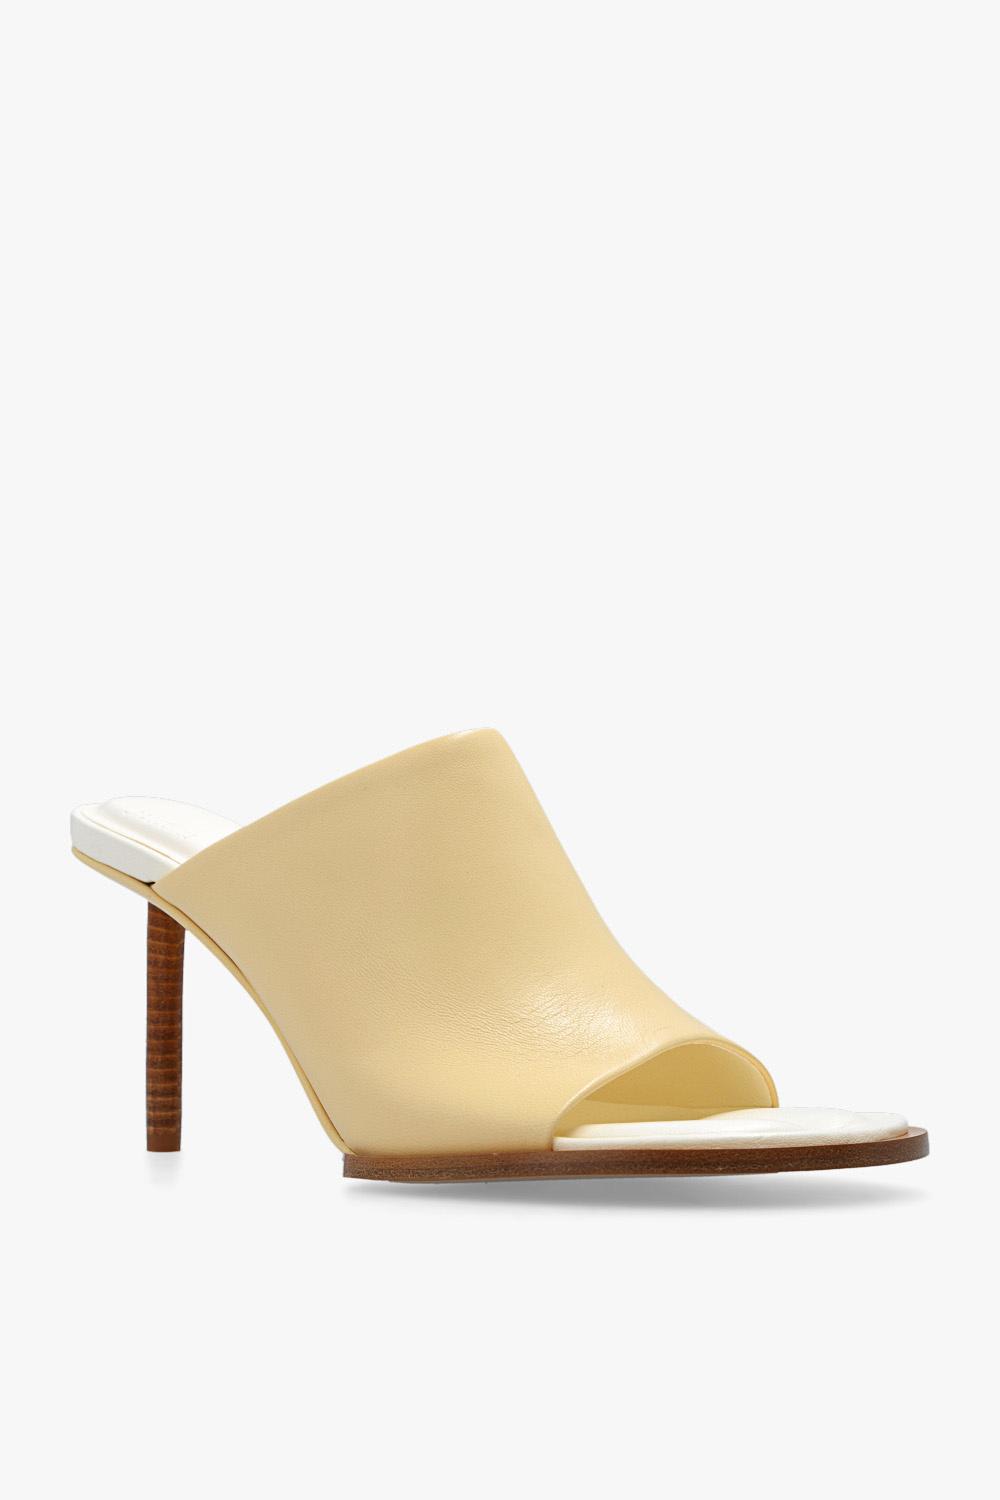 Shop Jacquemus Rond Carre Heeled Mules In Off-white